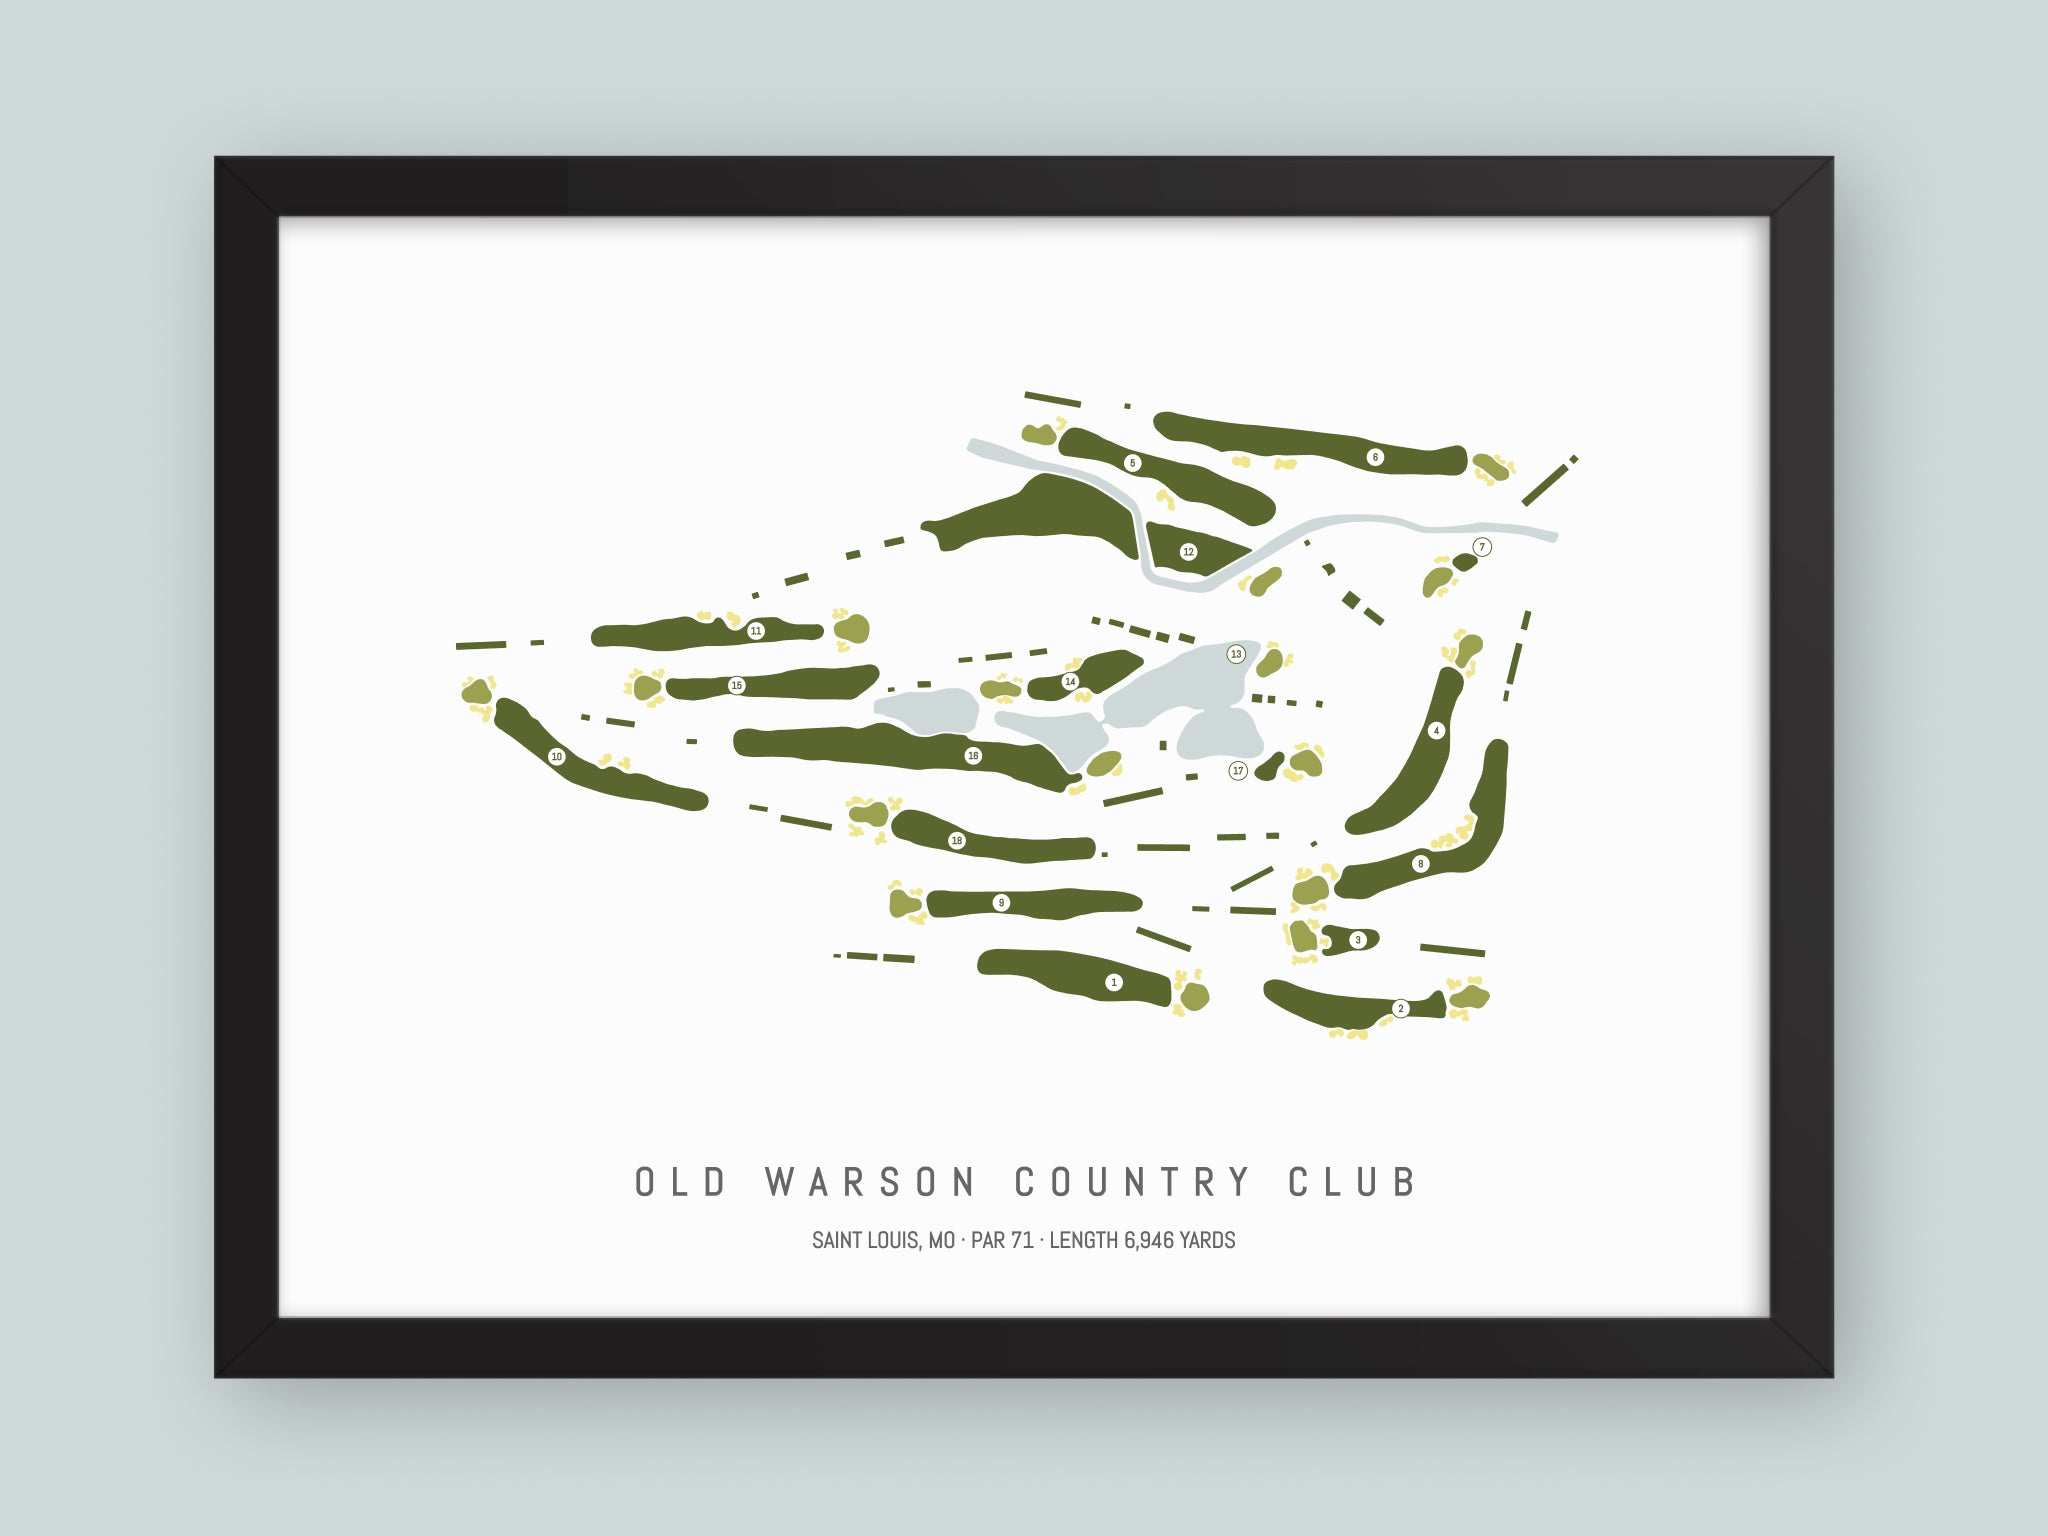 Old-Warson-Country-Club-MO--Black-Frame-24x18-With-Hole-Numbers